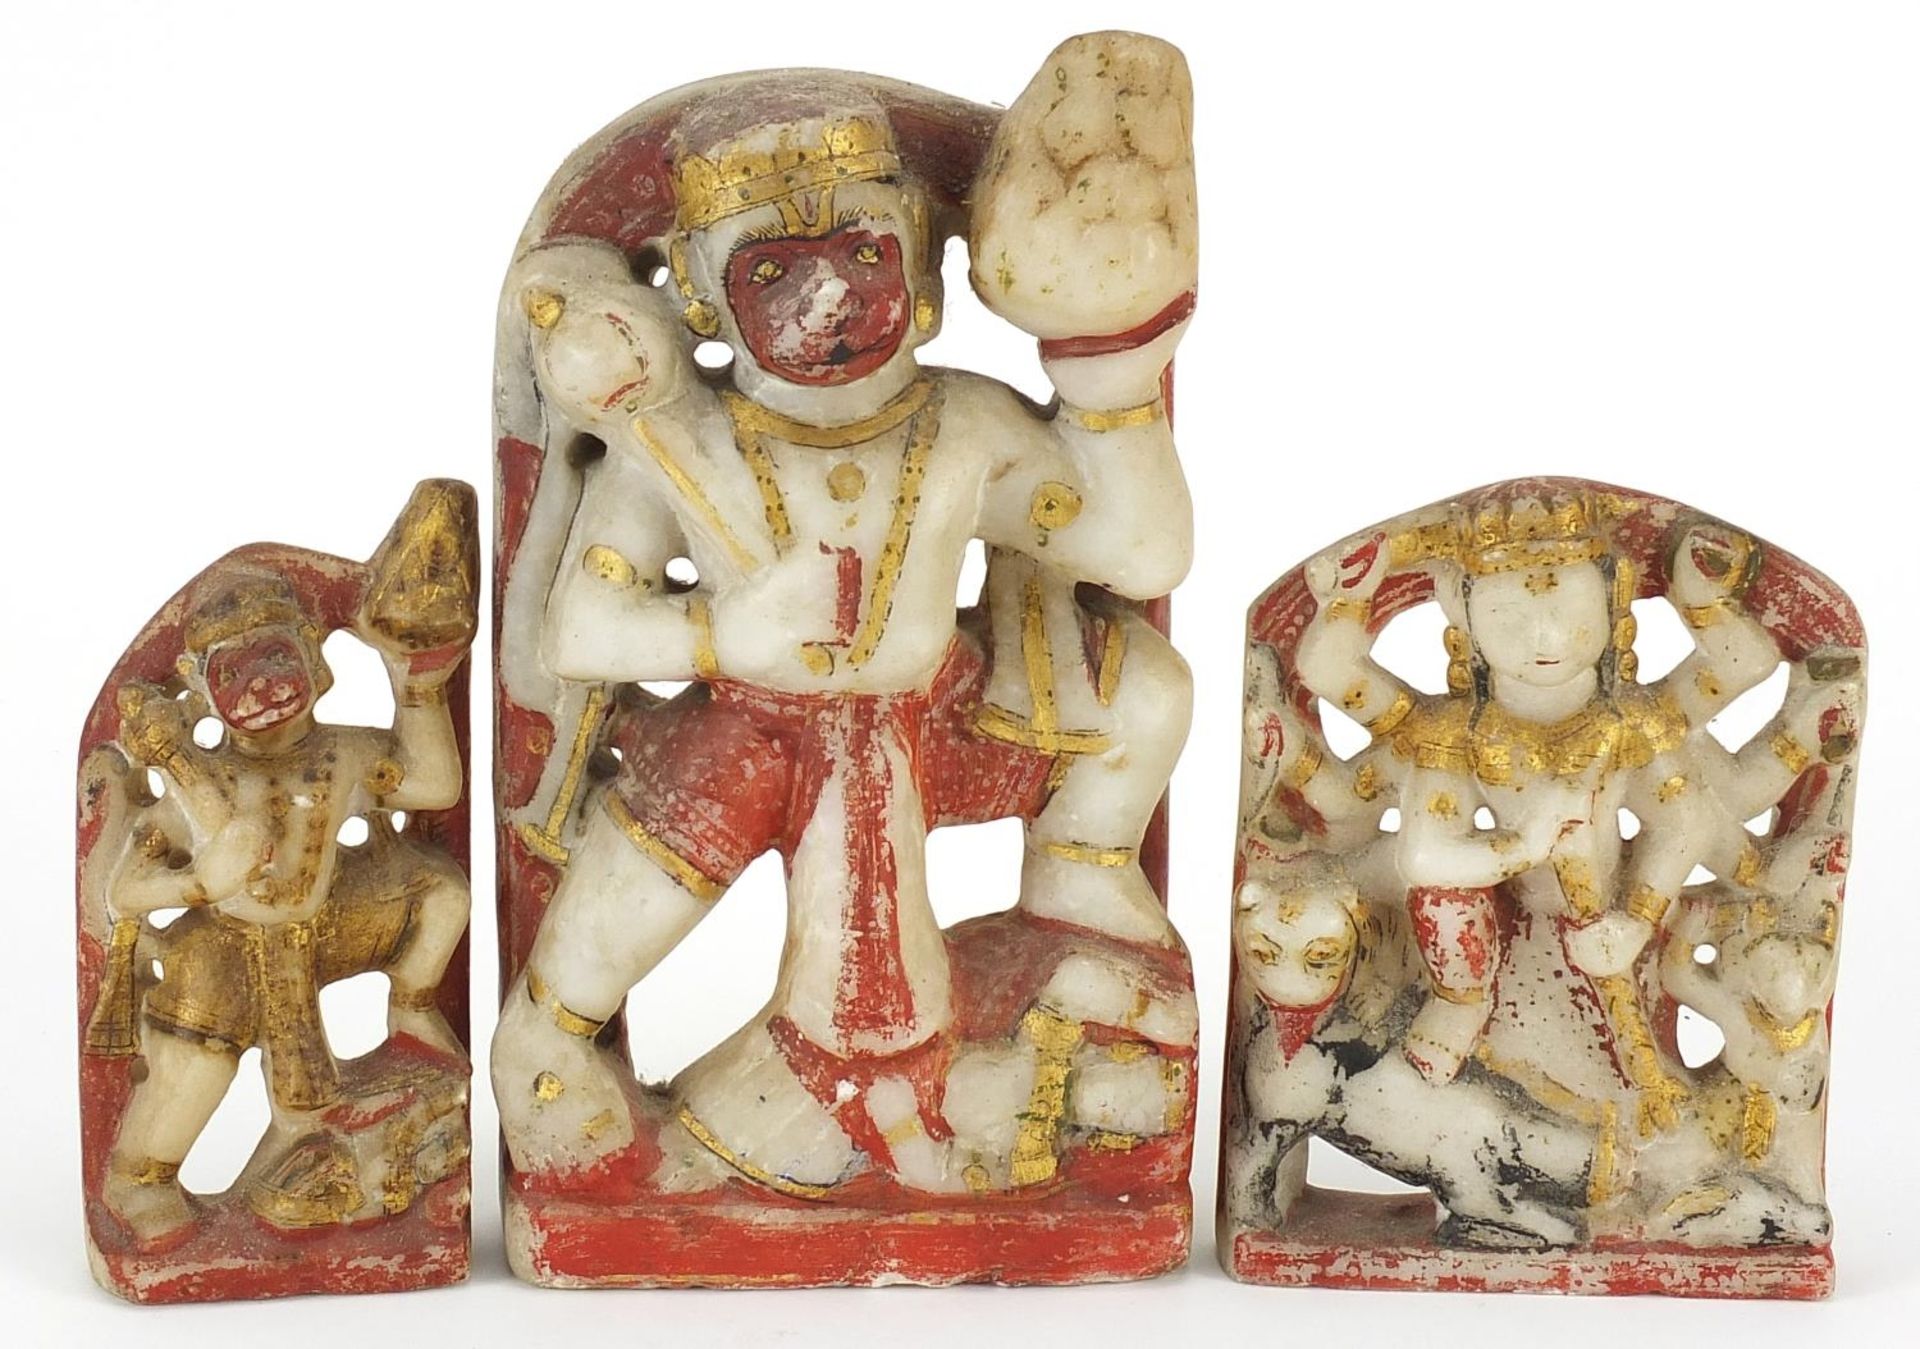 Three Indian sandstone carvings of Hanuman, the largest 21cm high